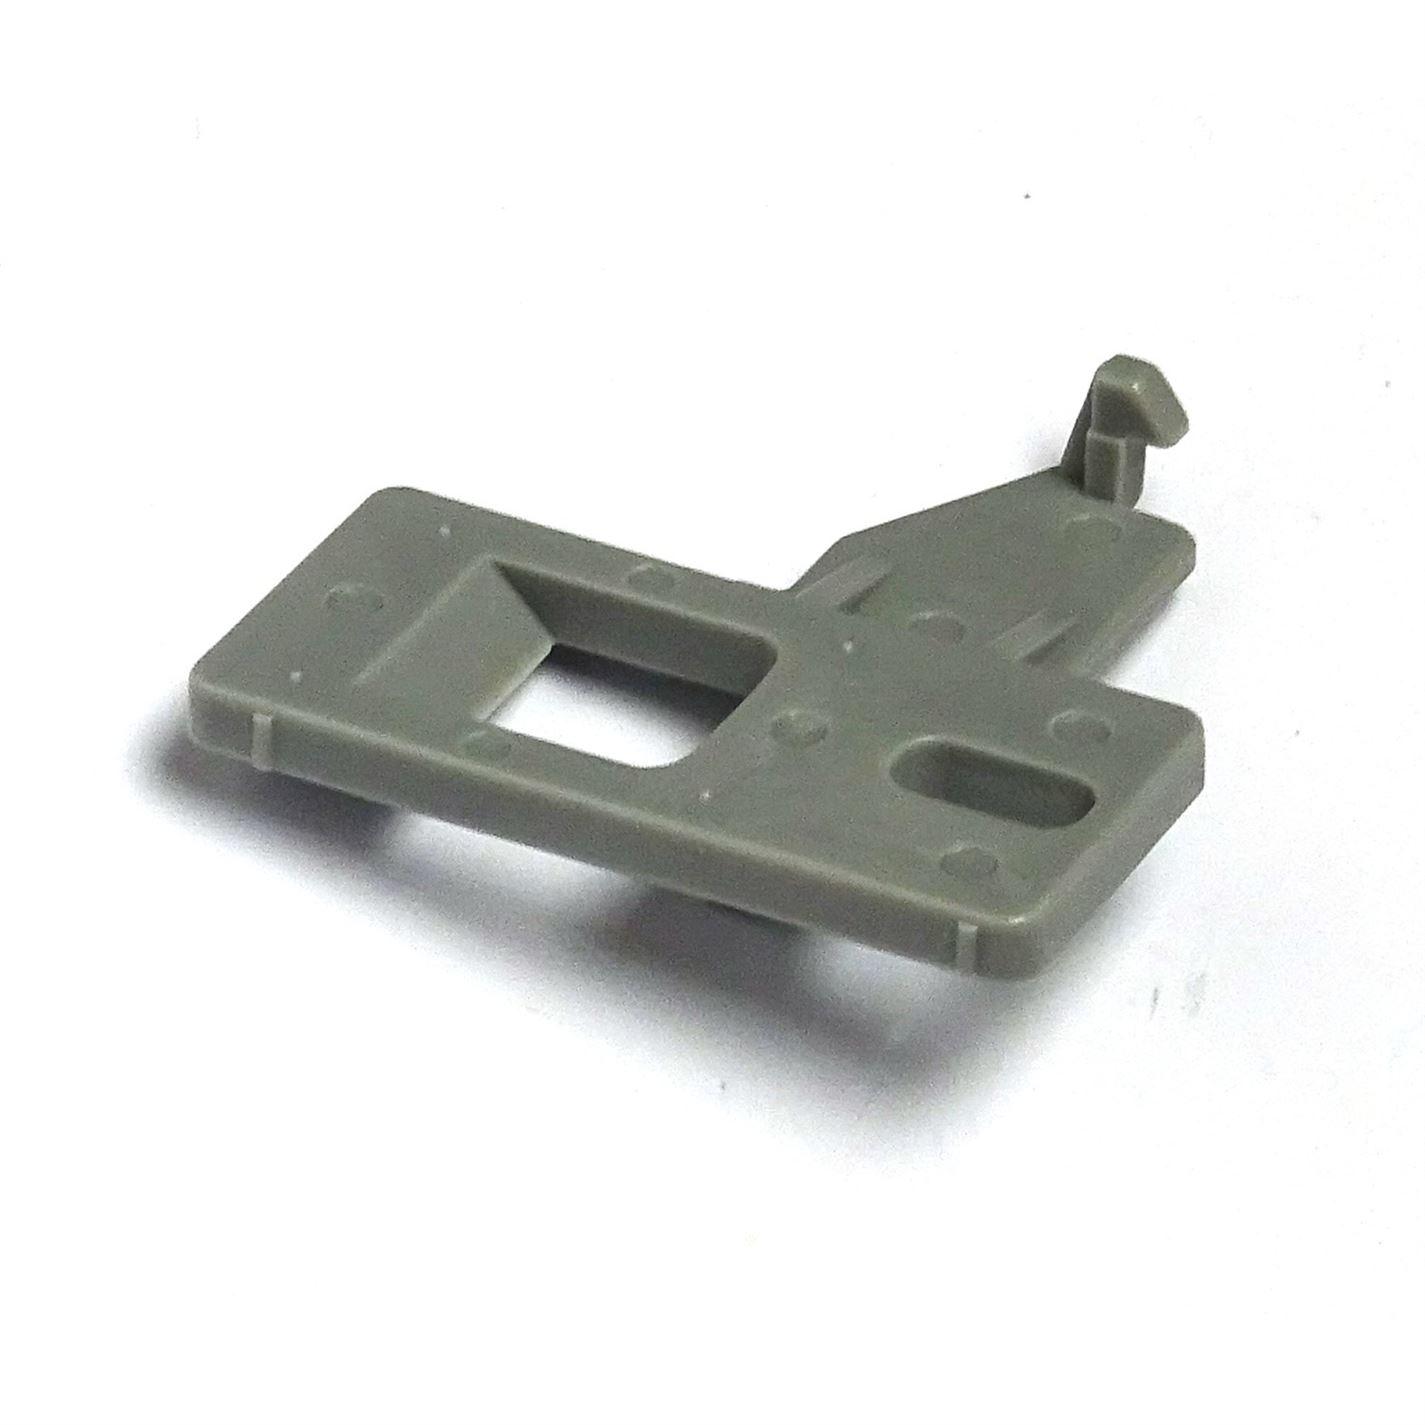 Sony PlayStation Lid Open/Eject Assembly (Type A) Genuine Replacement Part - UK Seller